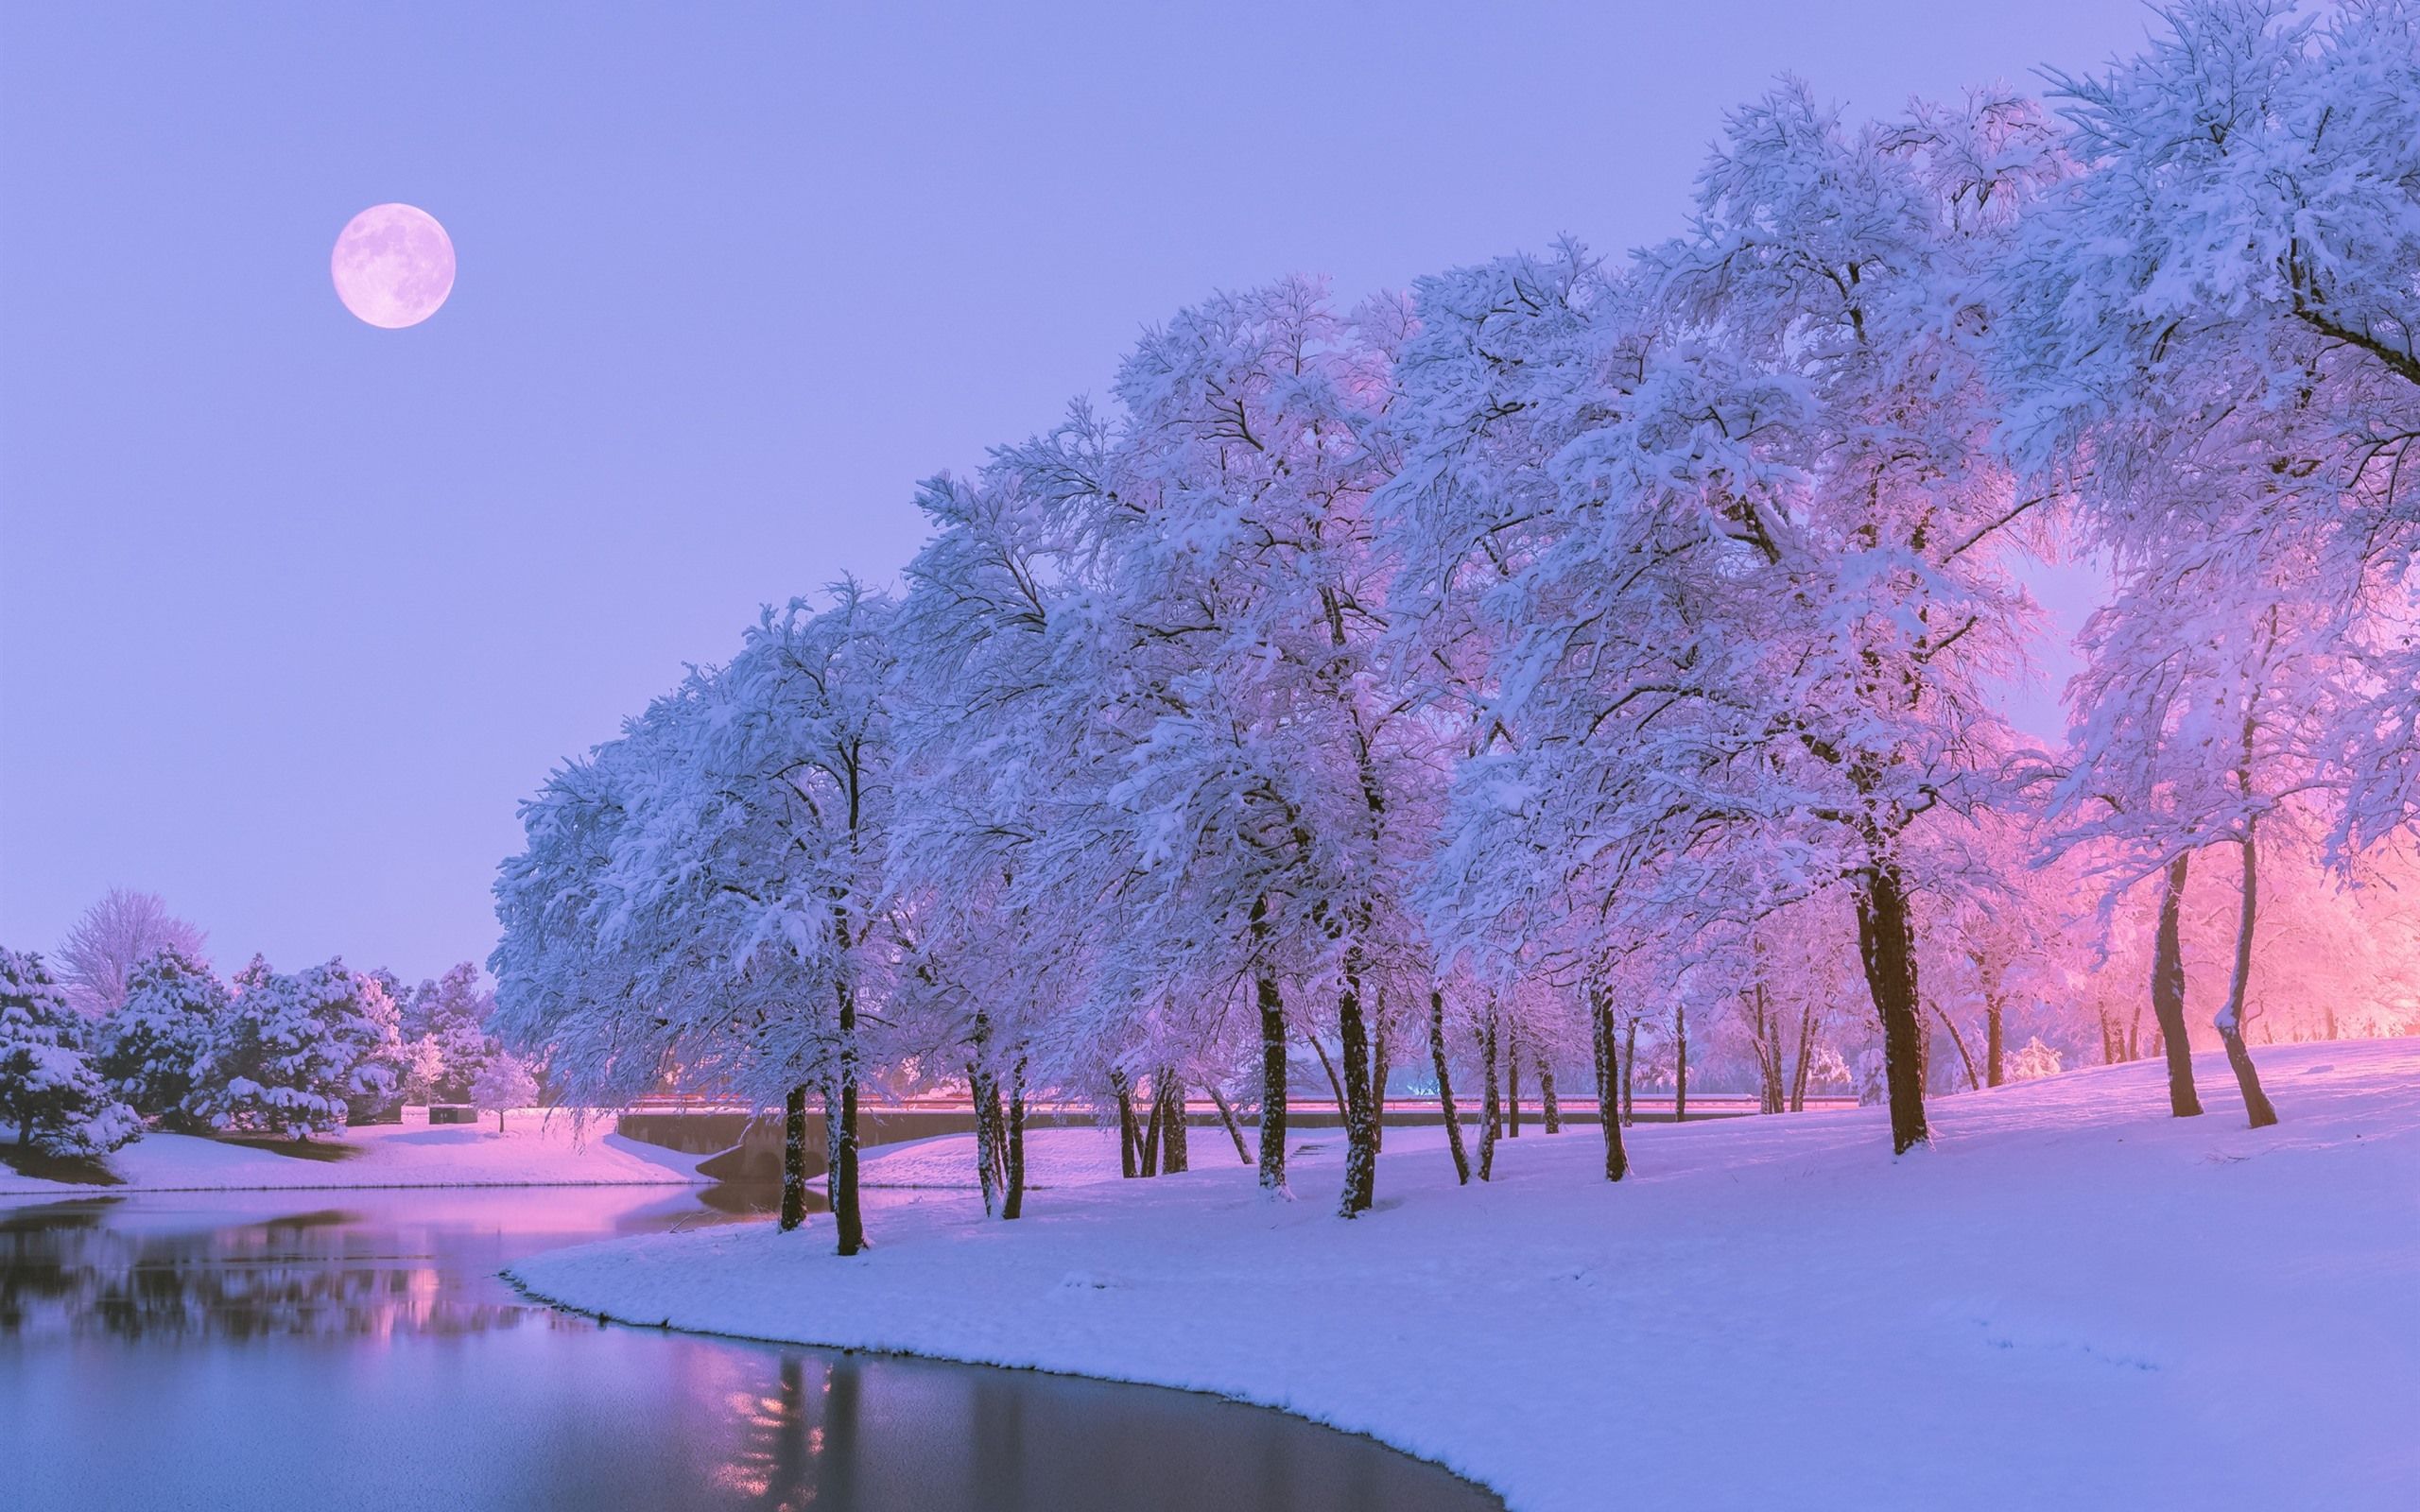 A beautiful winter night with a full moon, snow covered trees and a lake. - Snow, river